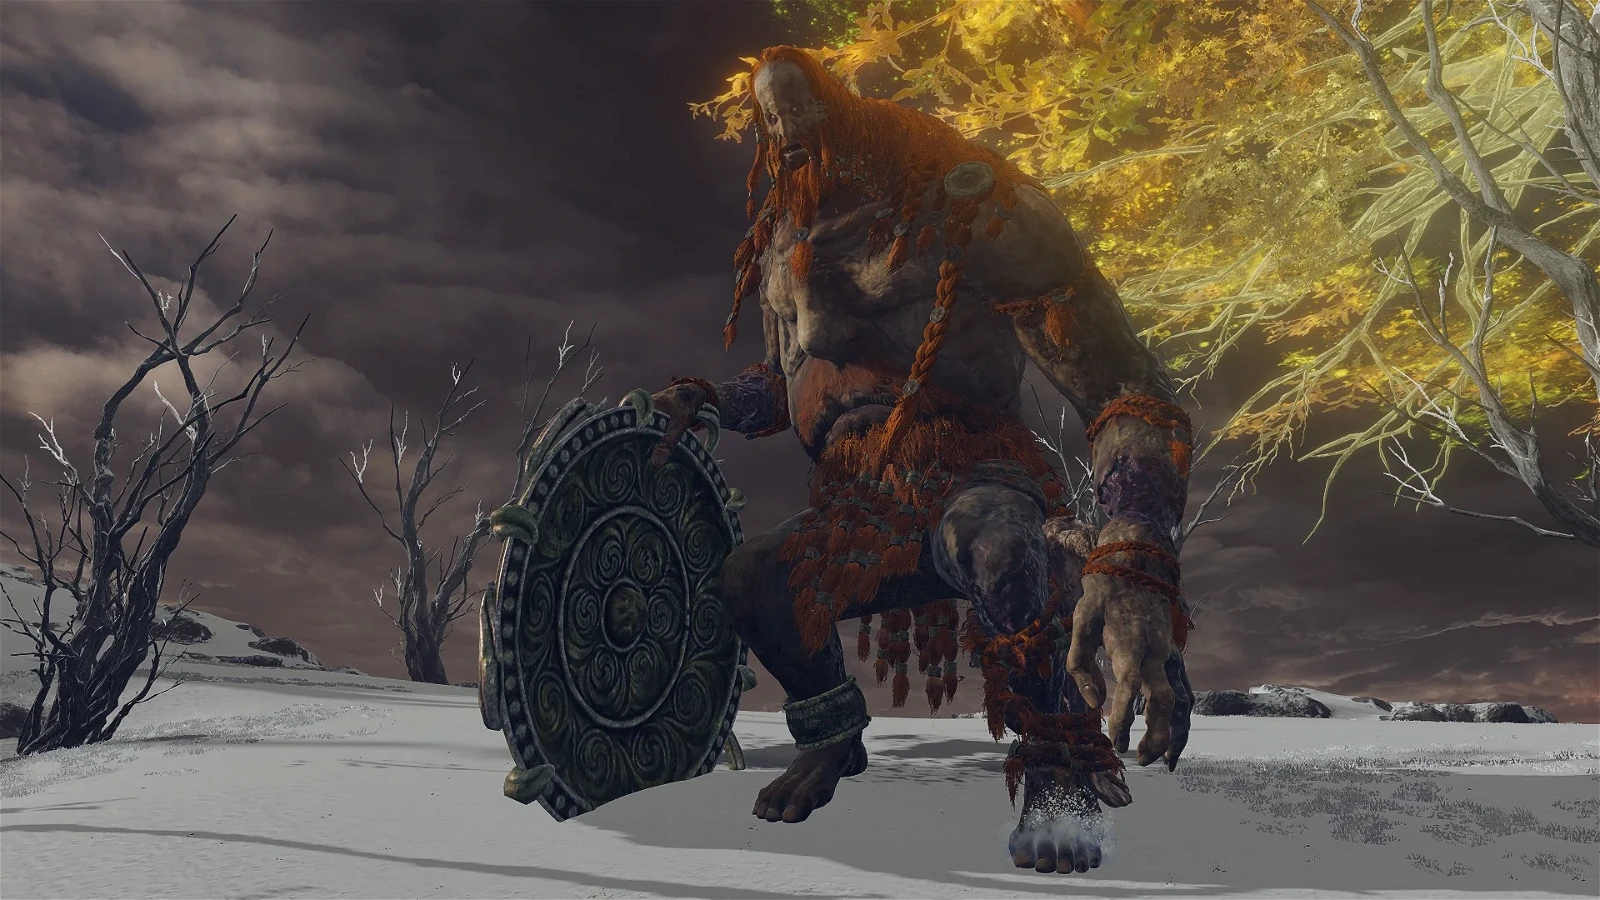 The Fire Giants are compared with the giants found in Dark Souls